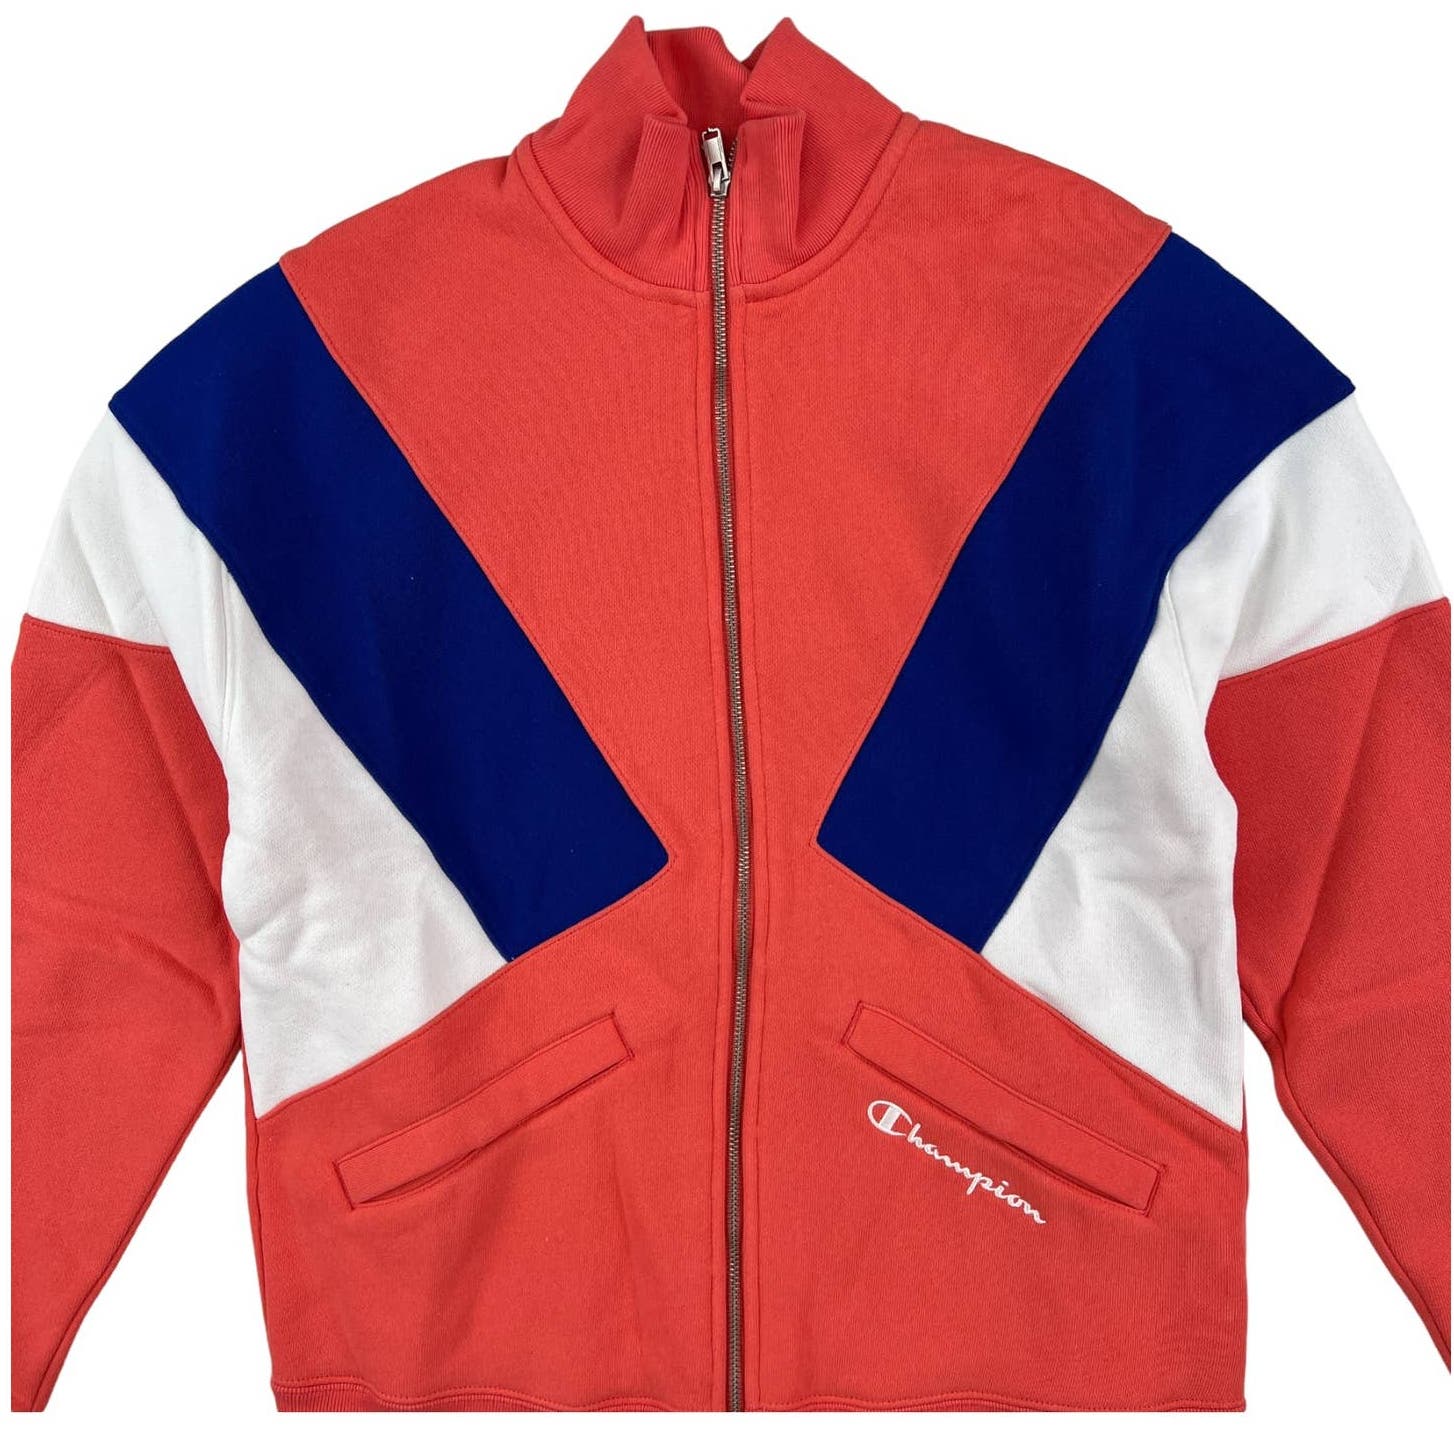 Champion Women US S Red Coral Full Zip Jacket Sport Training